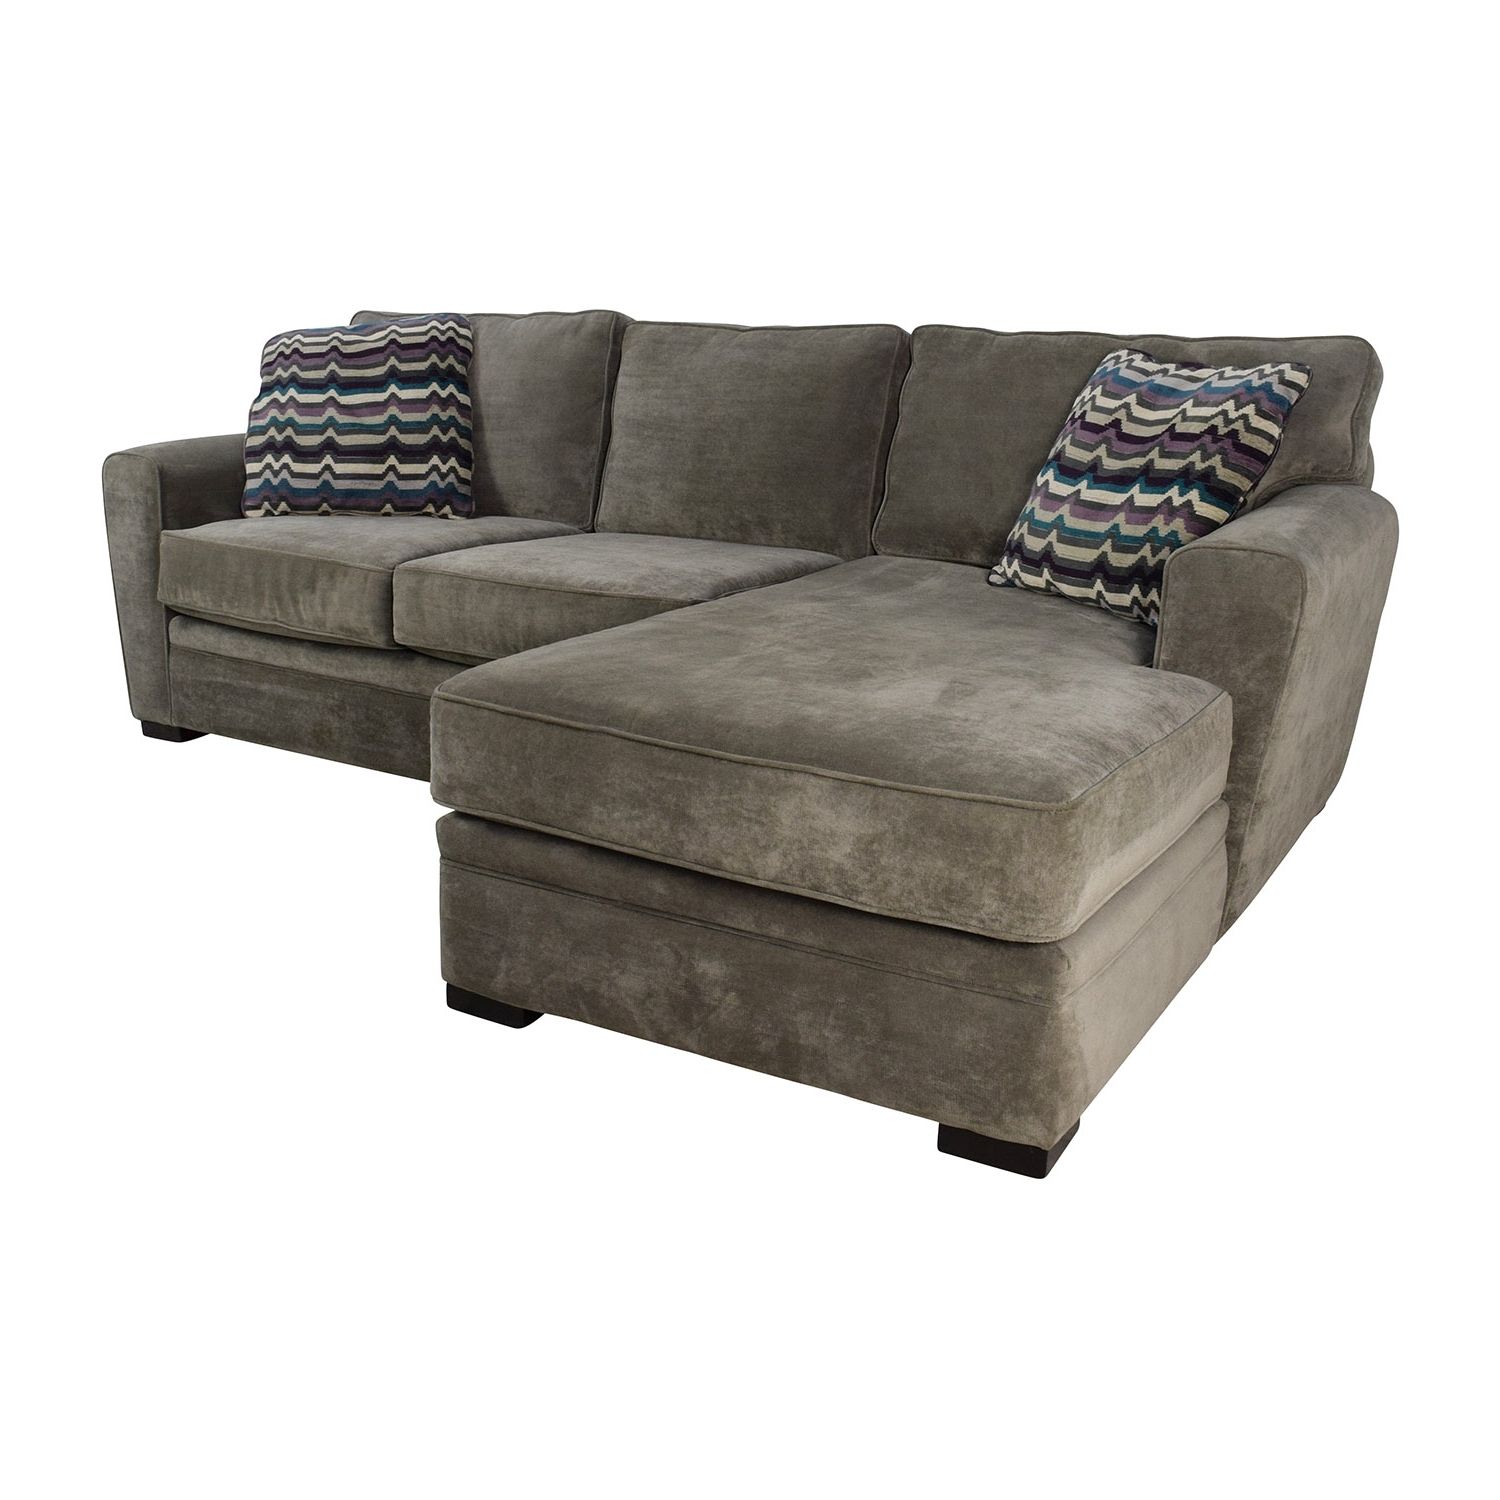 [%52% Off – Raymour & Flanigan Raymour & Flanigan Artemis Ii Throughout Current Raymour And Flanigan Sectional Sofas|raymour And Flanigan Sectional Sofas With Regard To Widely Used 52% Off – Raymour & Flanigan Raymour & Flanigan Artemis Ii|2019 Raymour And Flanigan Sectional Sofas Inside 52% Off – Raymour & Flanigan Raymour & Flanigan Artemis Ii|widely Used 52% Off – Raymour & Flanigan Raymour & Flanigan Artemis Ii With Raymour And Flanigan Sectional Sofas%] (View 1 of 20)